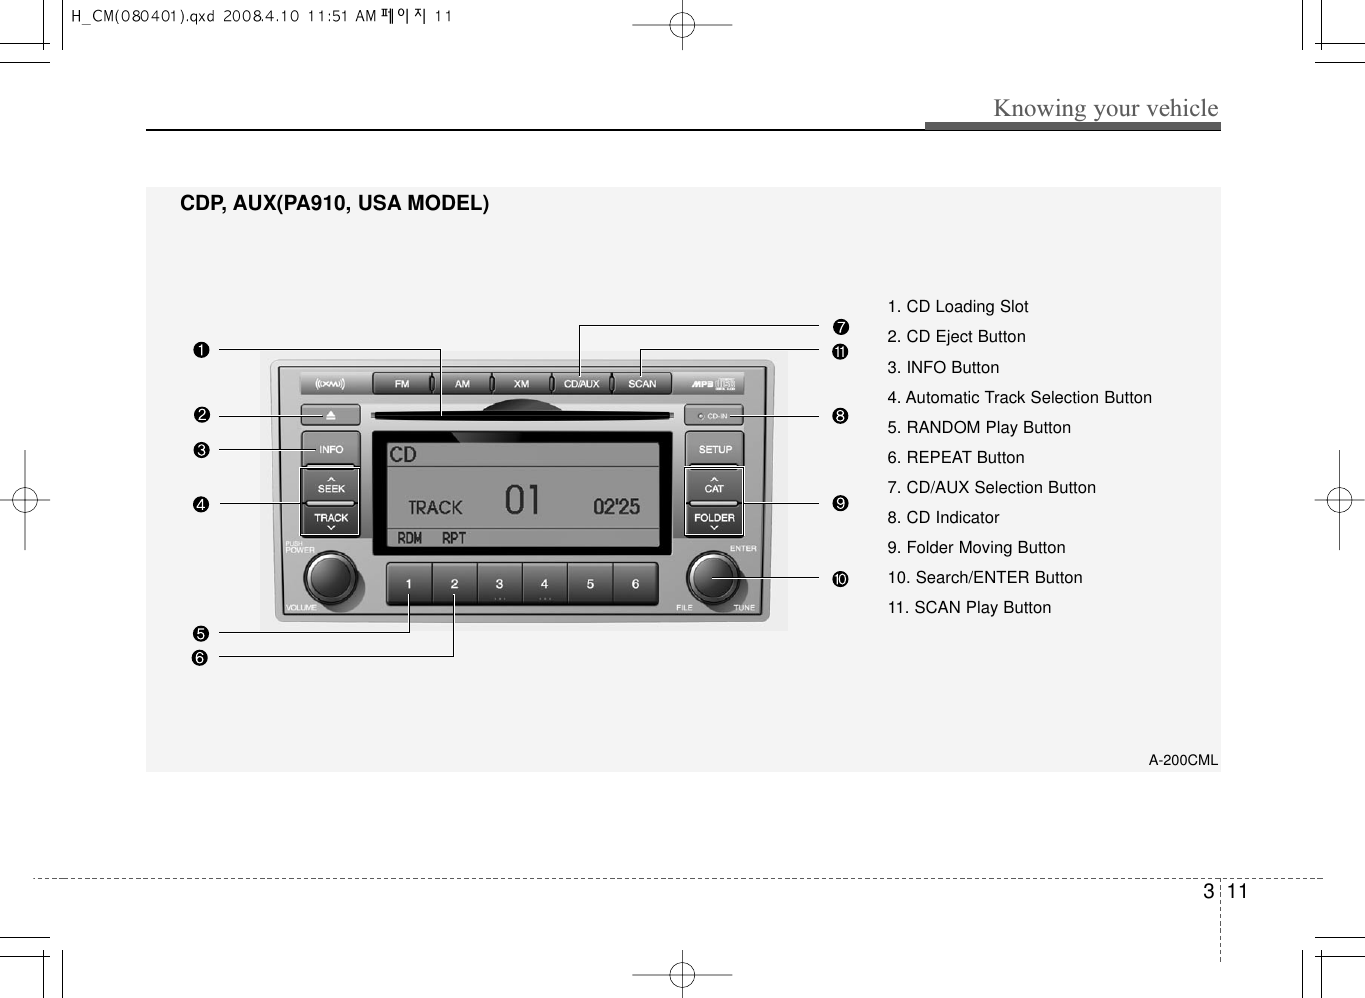 311Knowing your vehicleA-200CML1. CD Loading Slot2. CD Eject Button3. INFO Button4. Automatic Track Selection Button5. RANDOM Play Button6. REPEAT Button7. CD/AUX Selection Button8. CD Indicator9. Folder Moving Button10. Search/ENTER Button11. SCAN Play ButtonCDP, AUX(PA910, USA MODEL) 